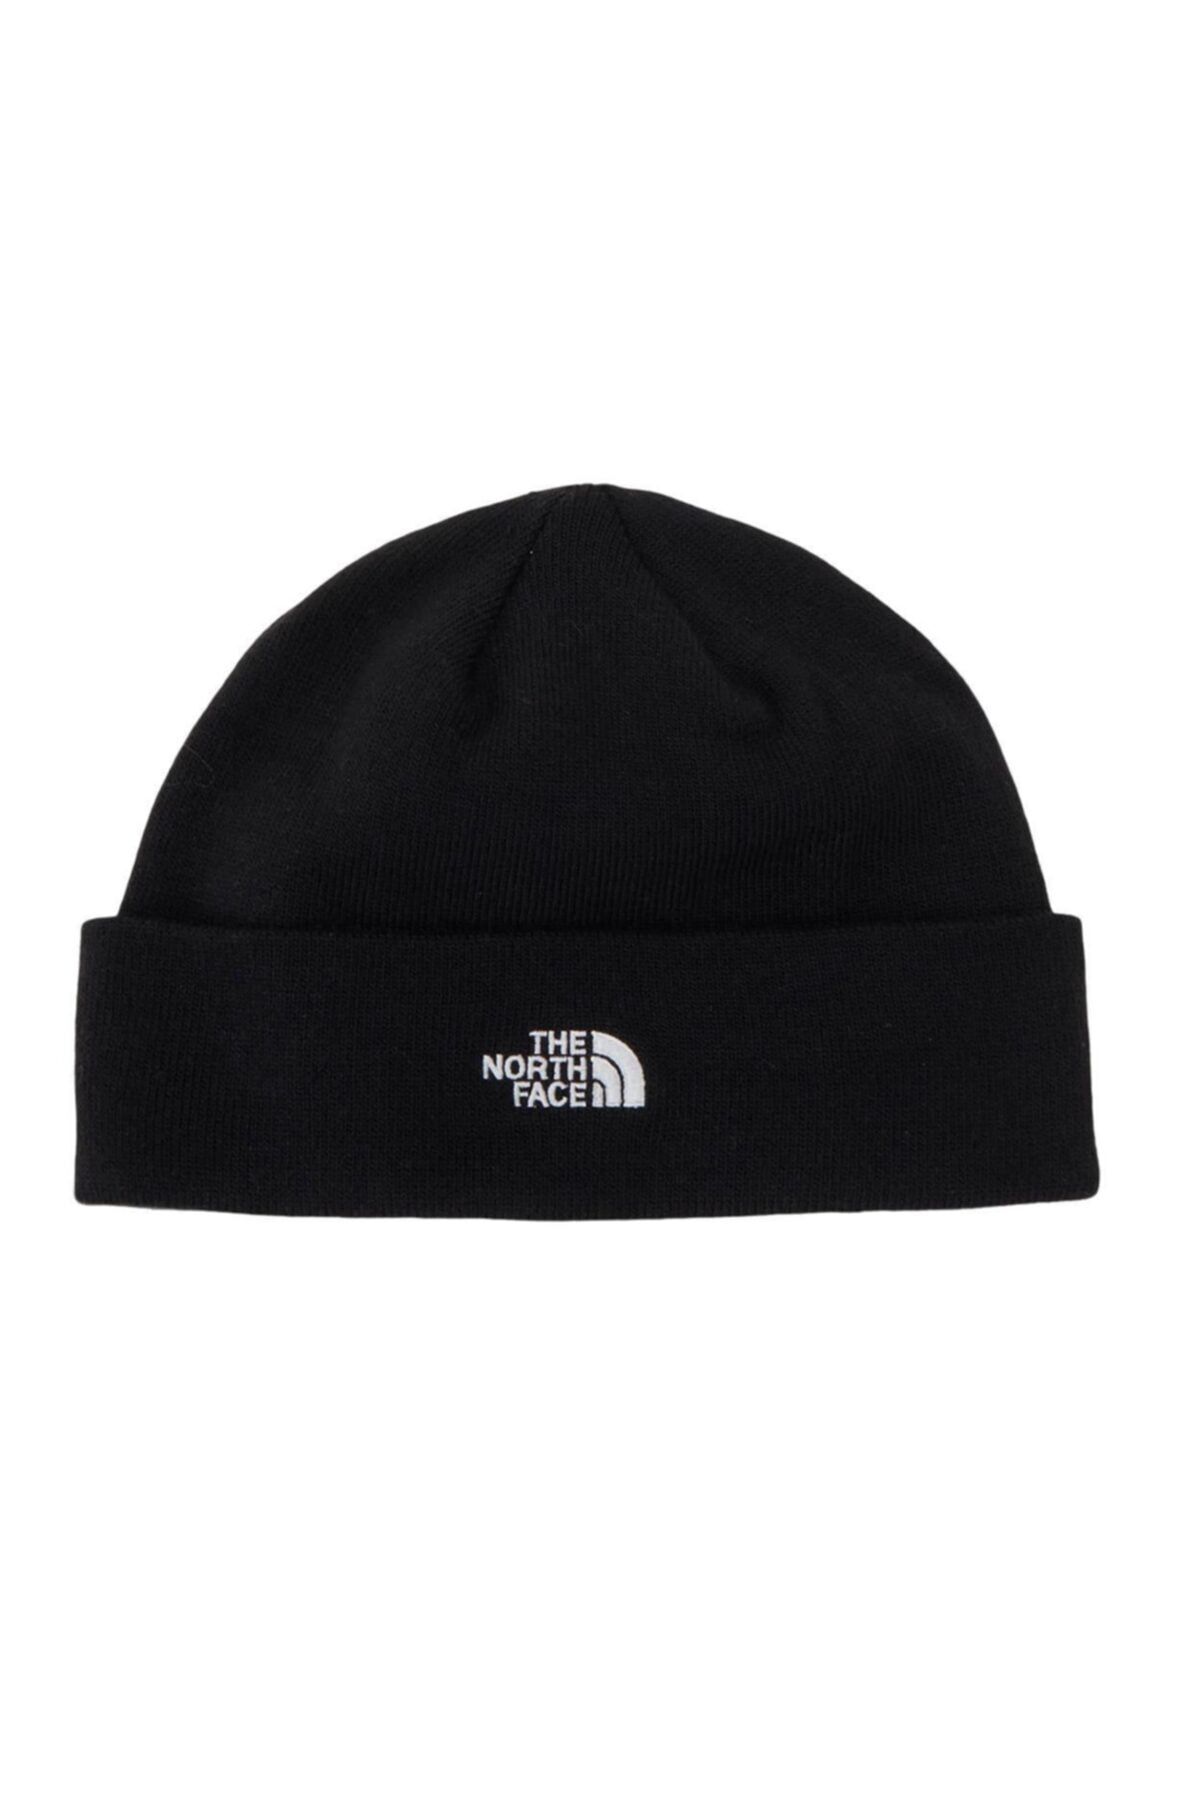 The North Face Norm Shallow Beanie Unisex Bere - T95fvzjk3